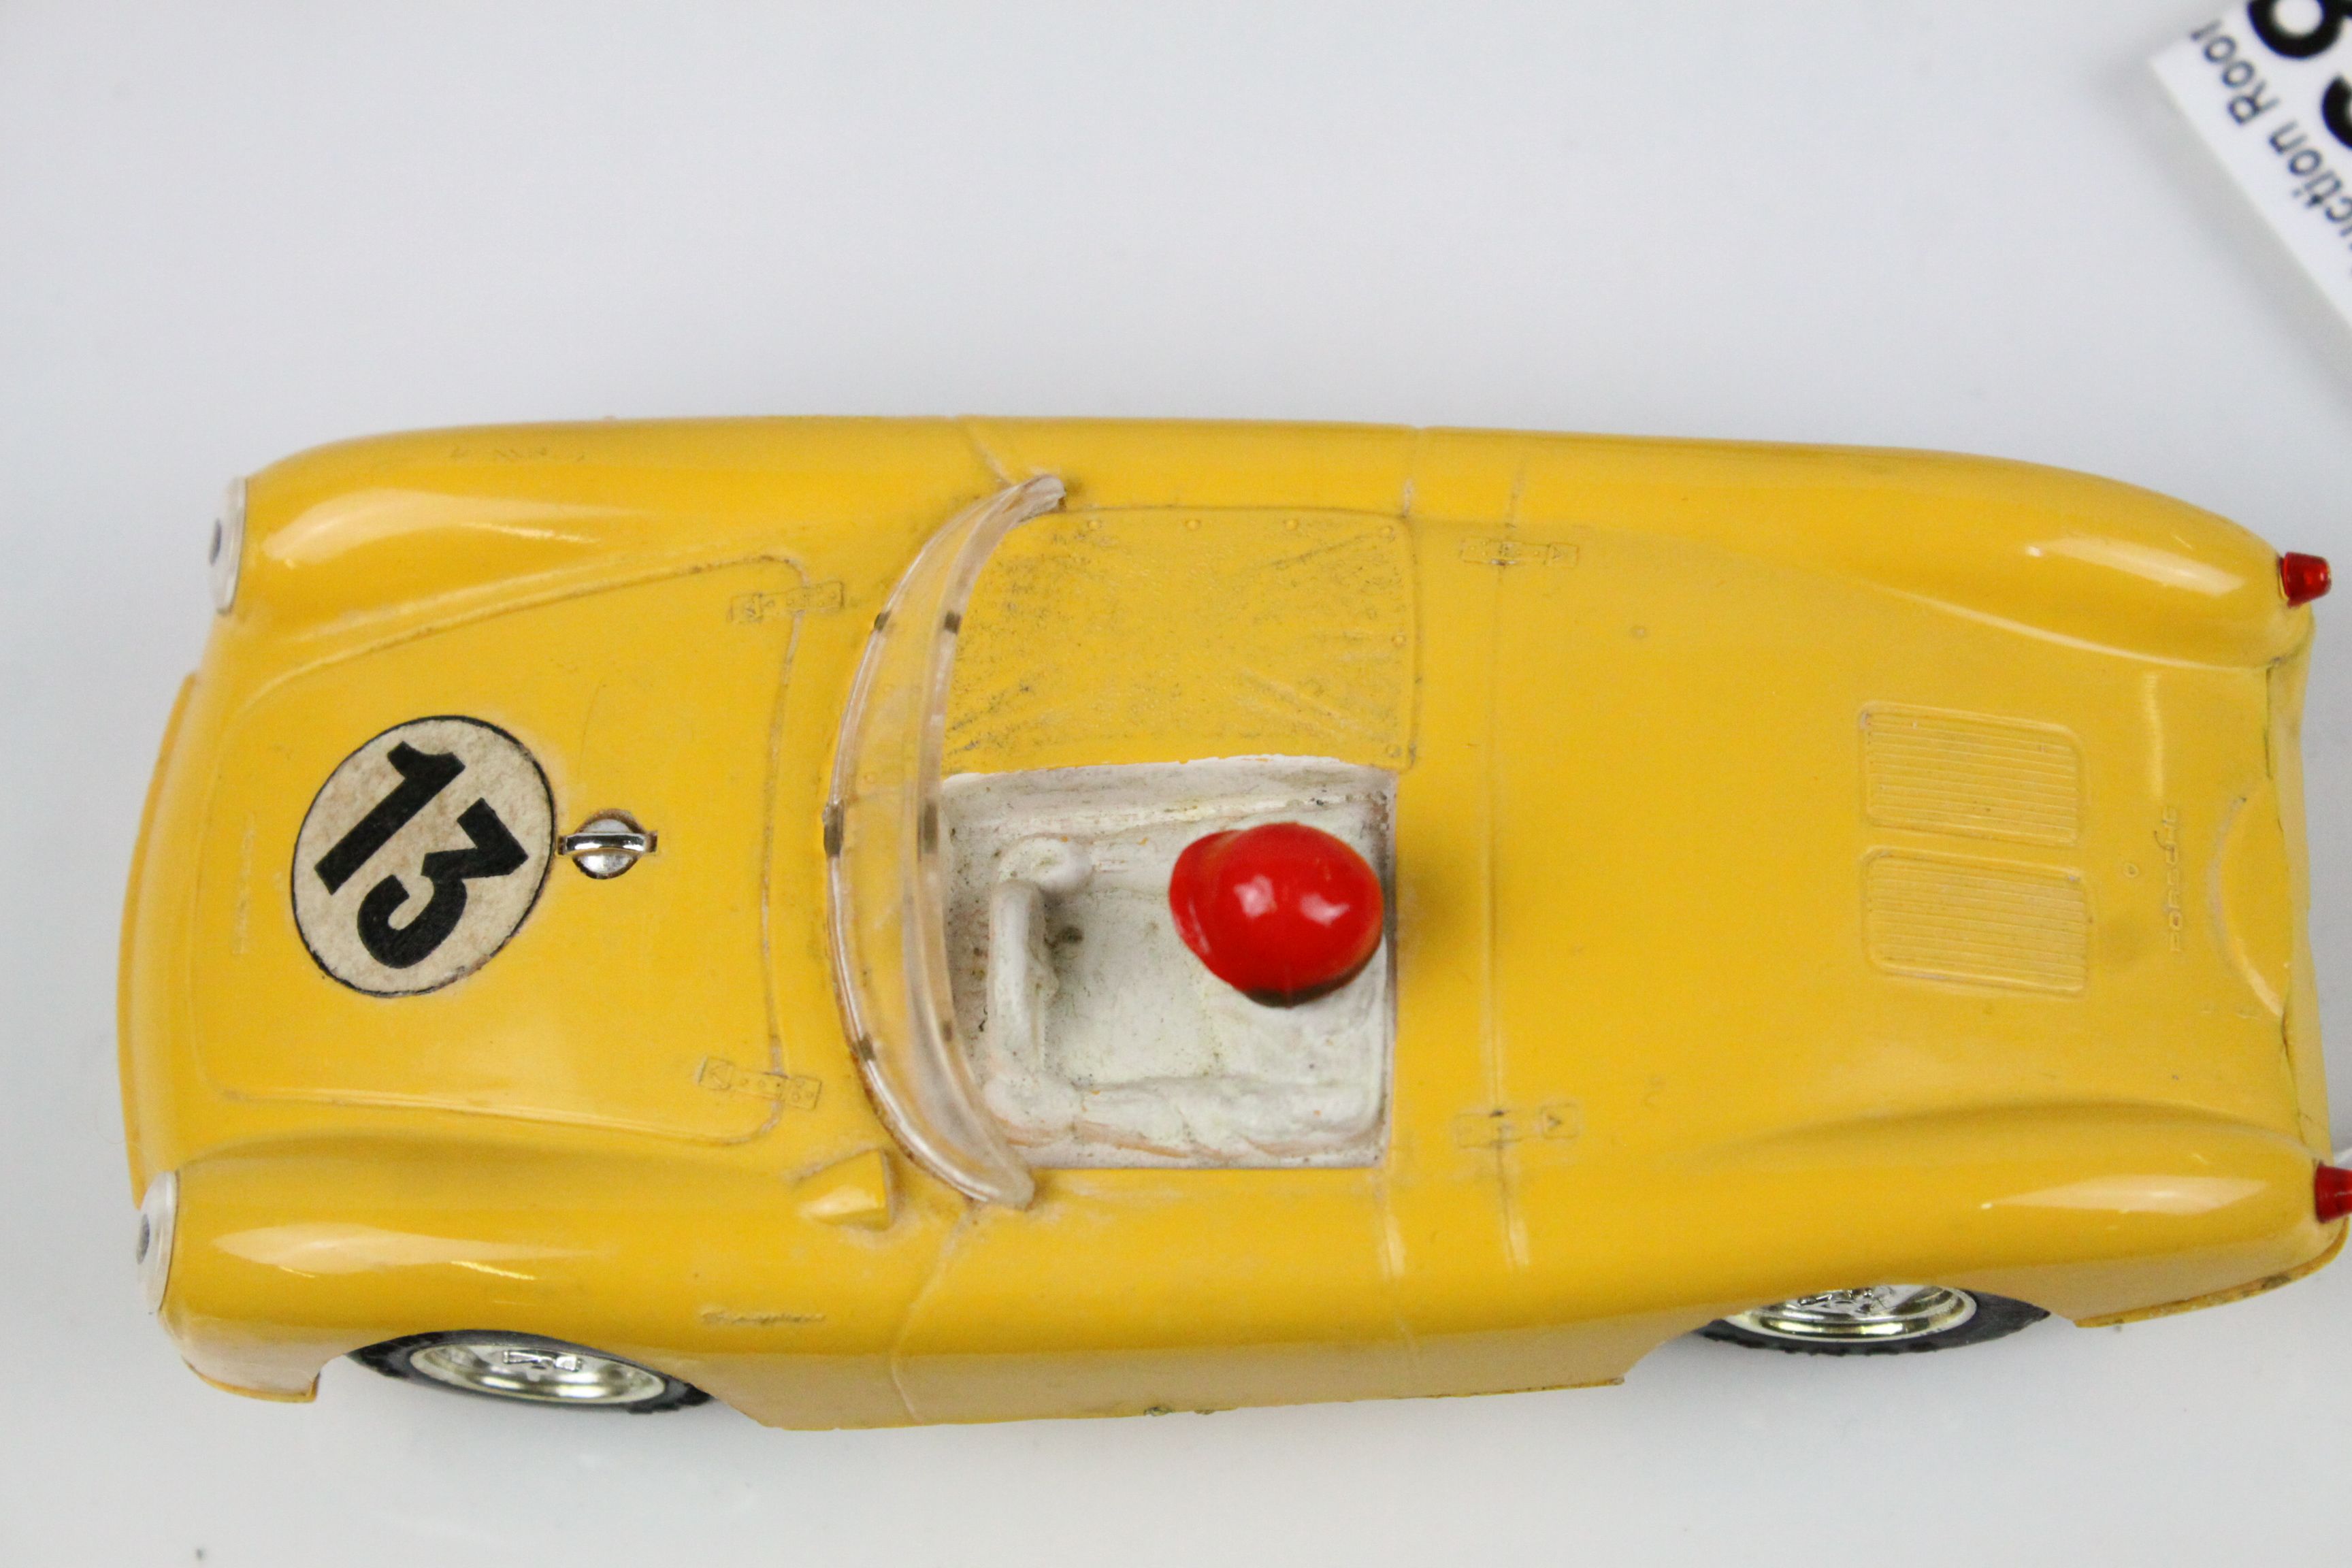 Boxed Triang Scalextric MM C61 Porsche slot car in yellow, driver with red helmet, race number 13, - Image 7 of 11